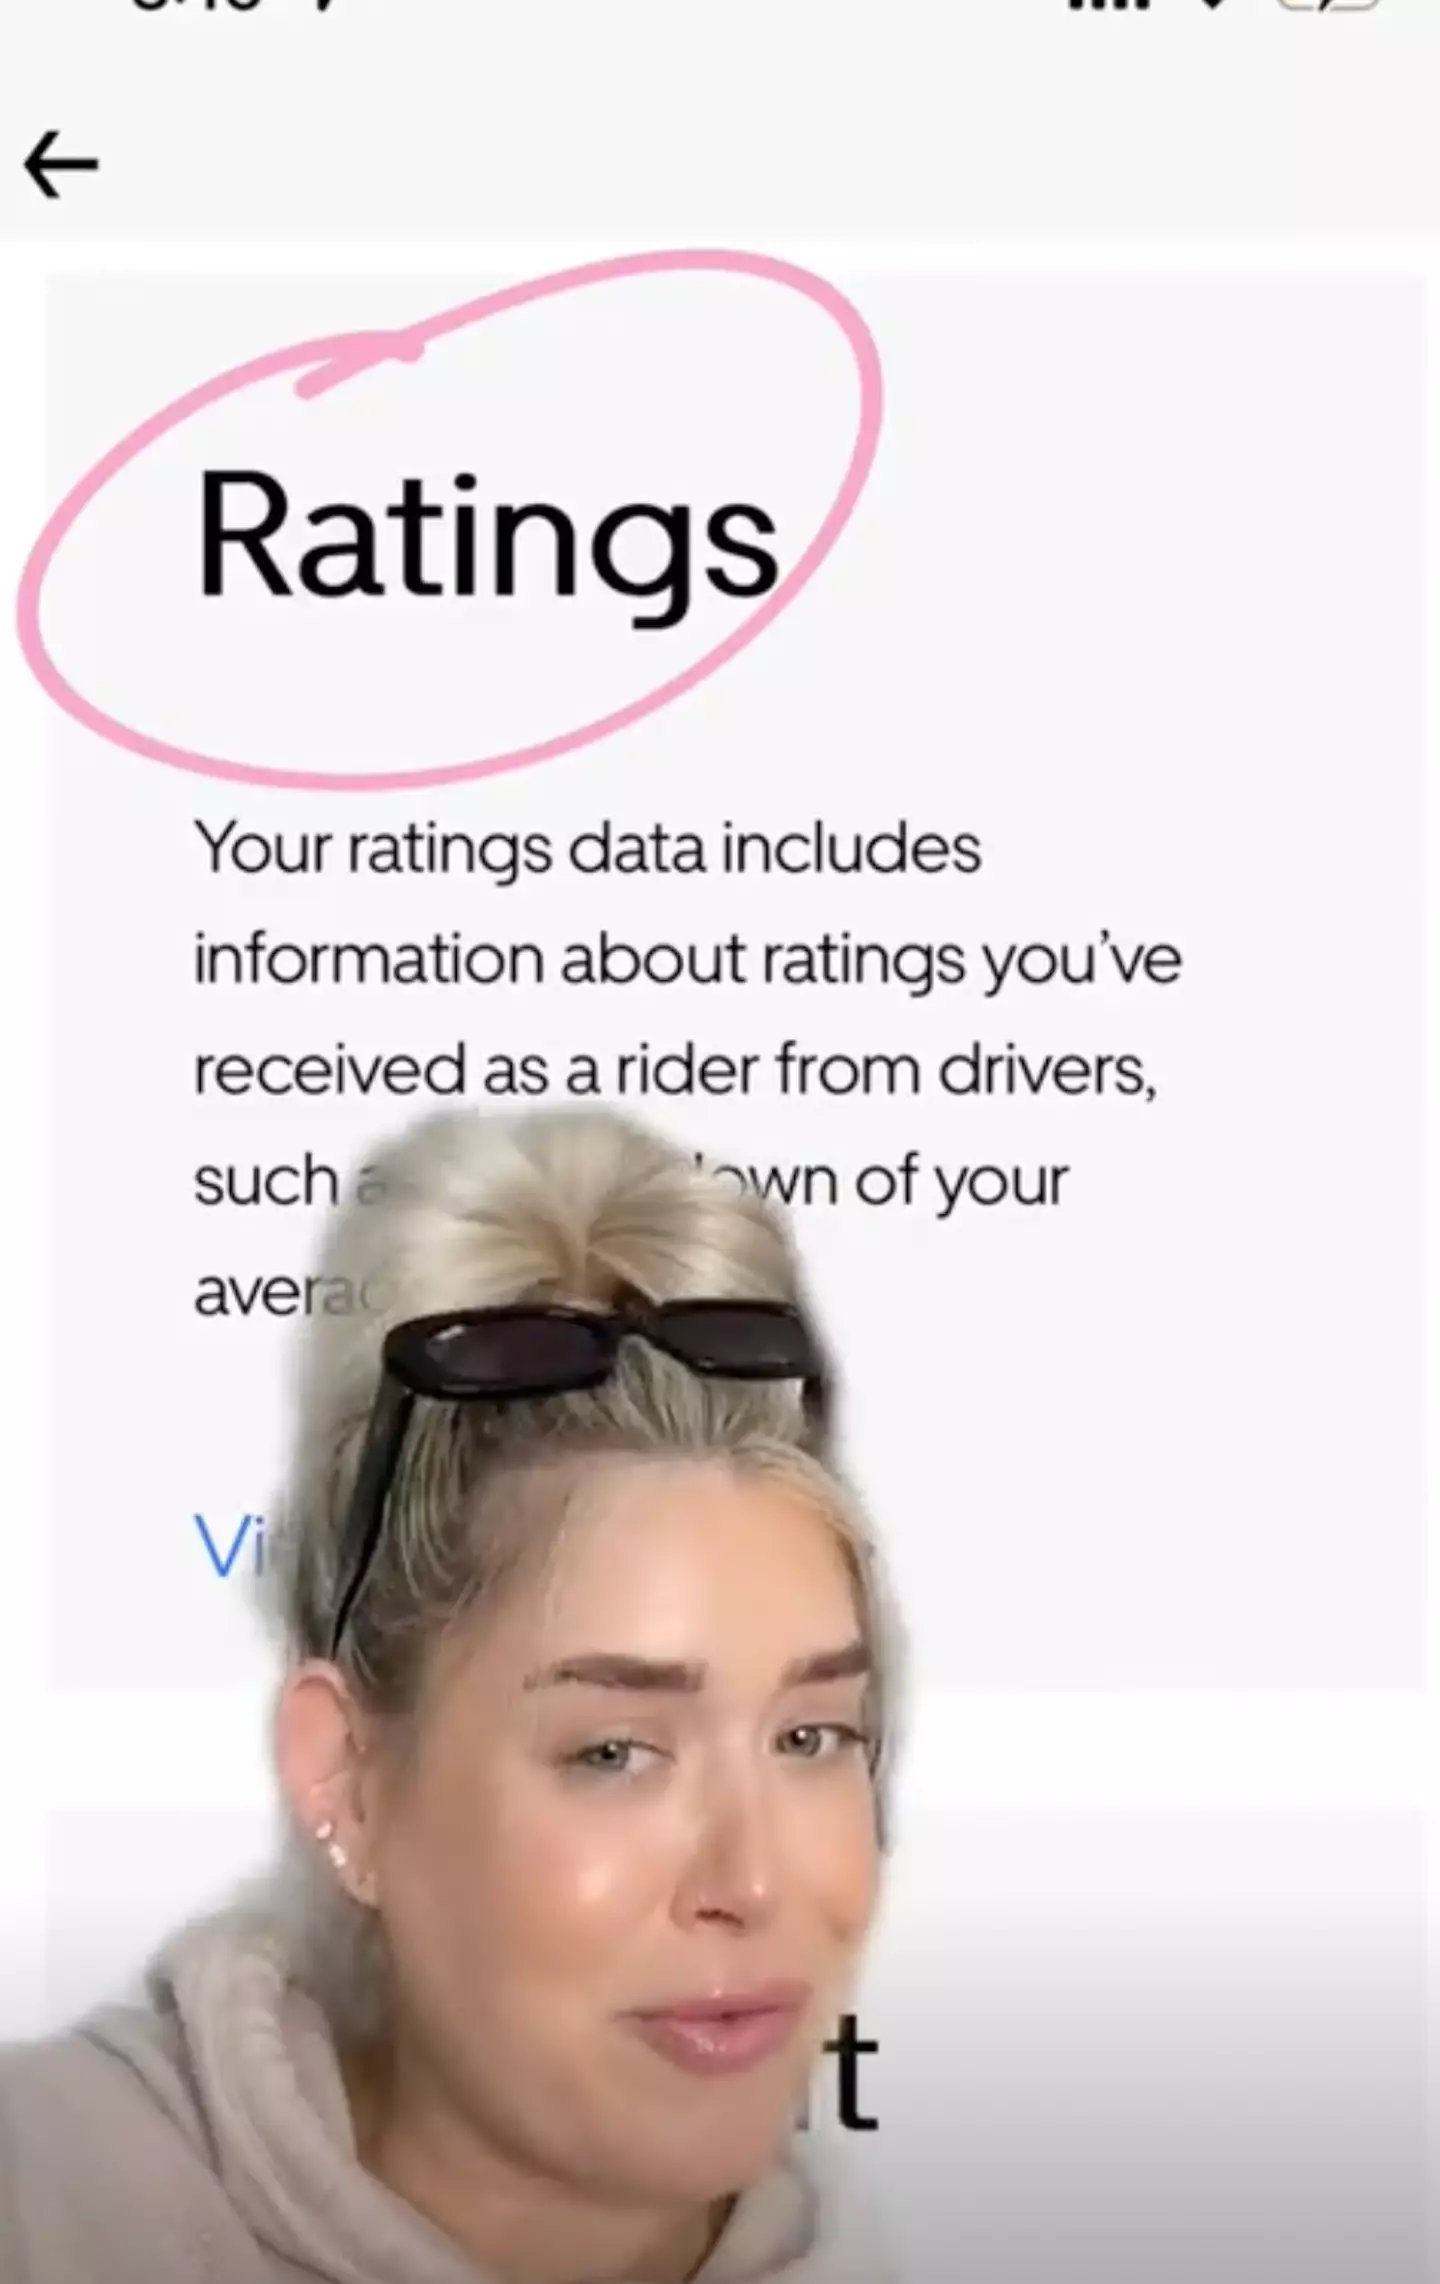 Emma has revealed how to see what Uber drivers have been rating you.